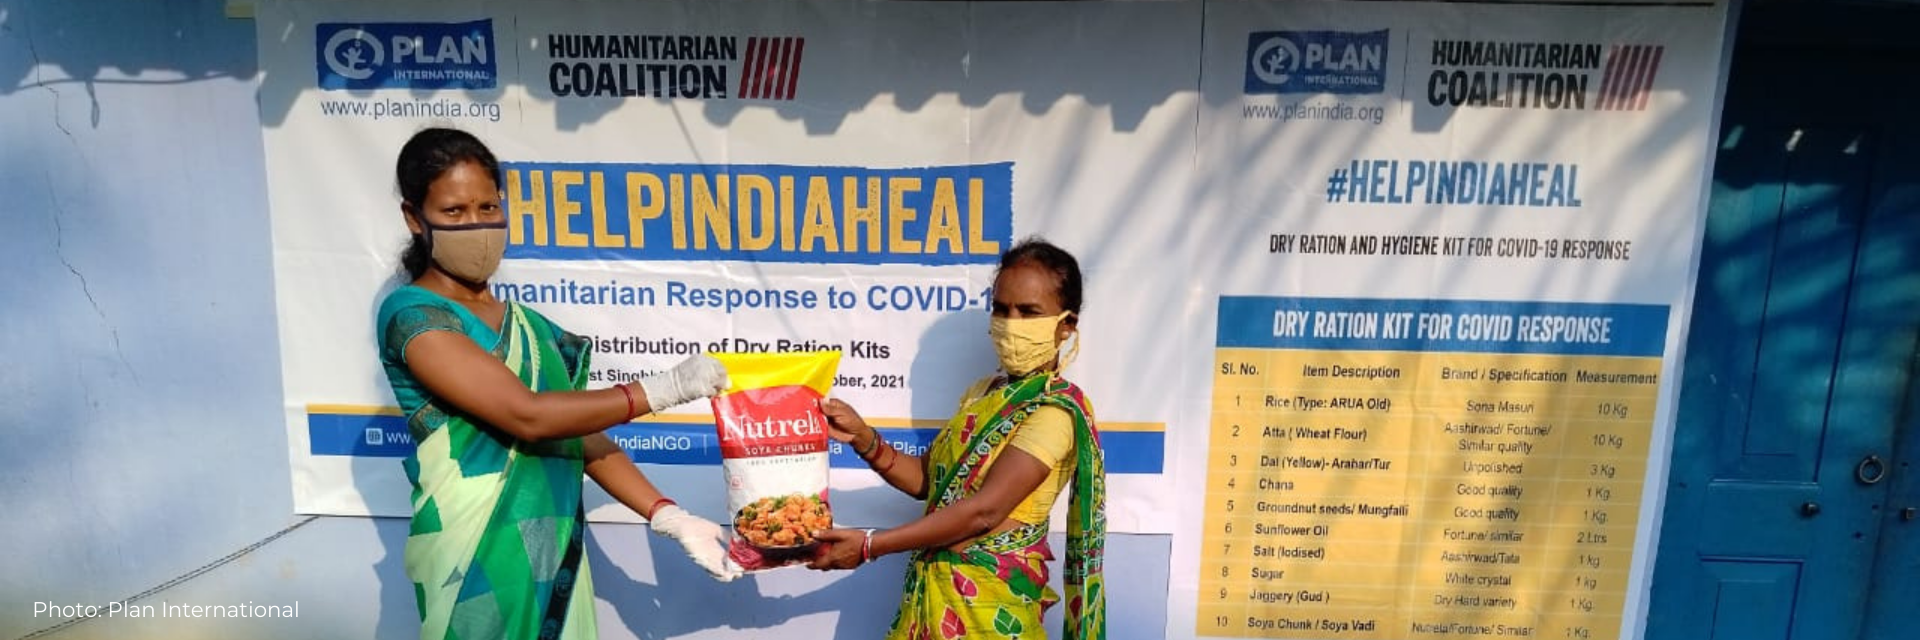 Two women show the bag of food rations distributed to COVID survivors in India